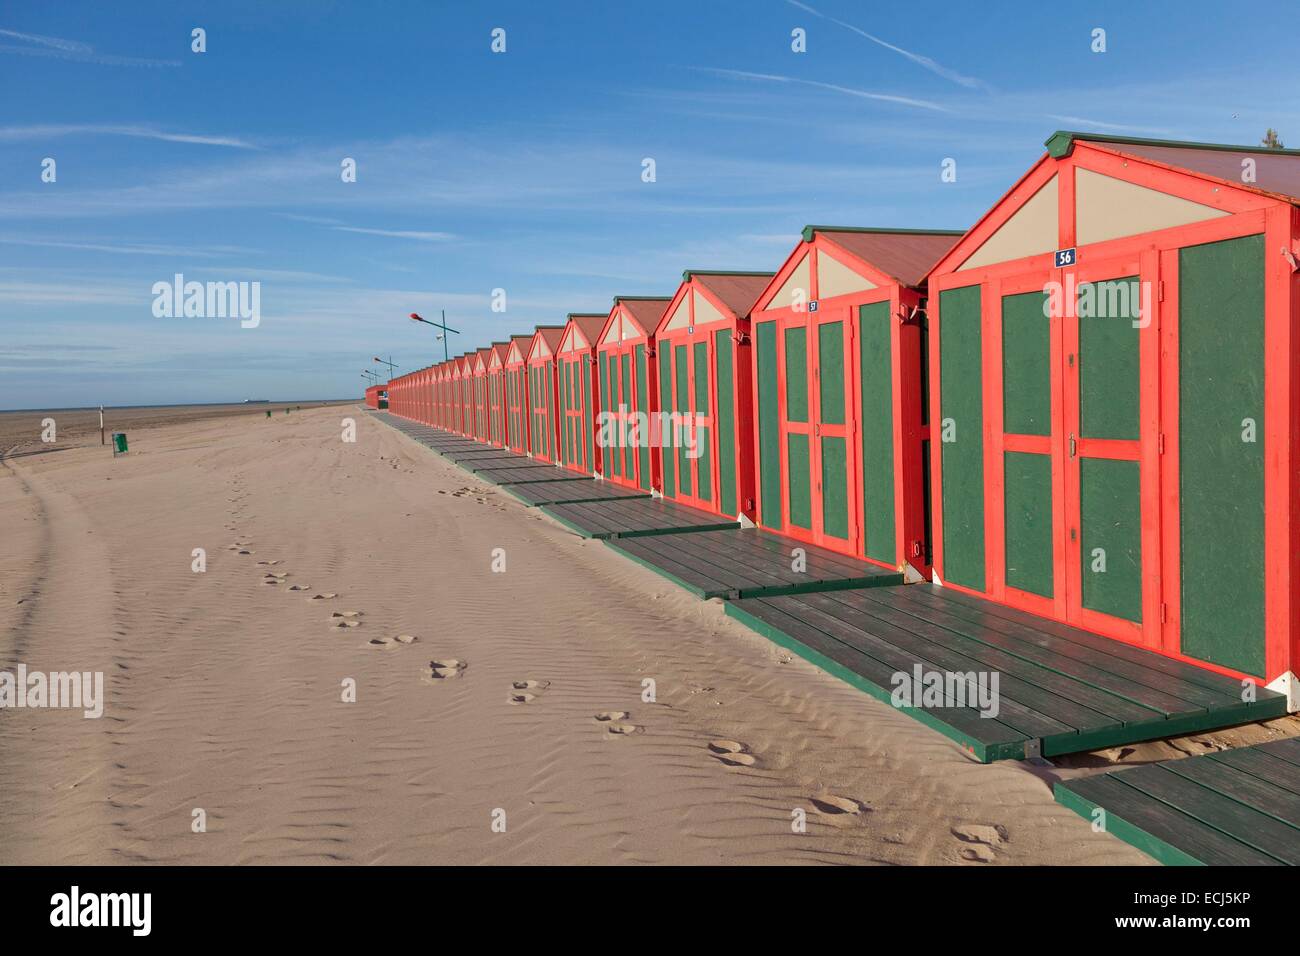 France, Nord, Petit fort philippe, beach huts Stock Photo